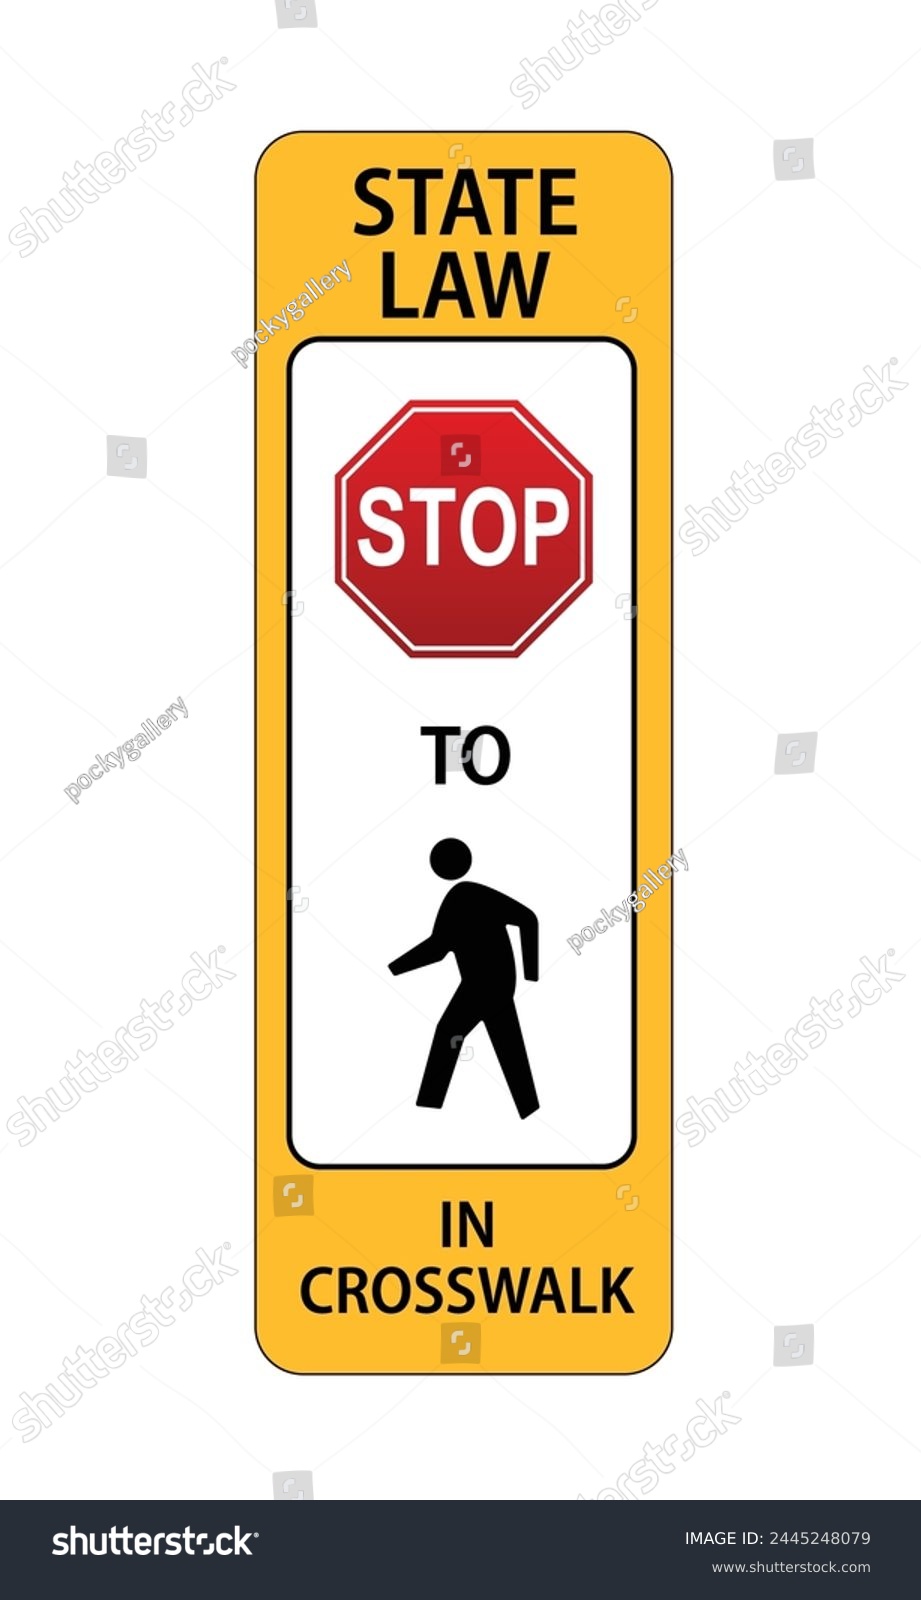 SVG of Traffic sign state law stop to pedestrians in crosswalk on white background svg